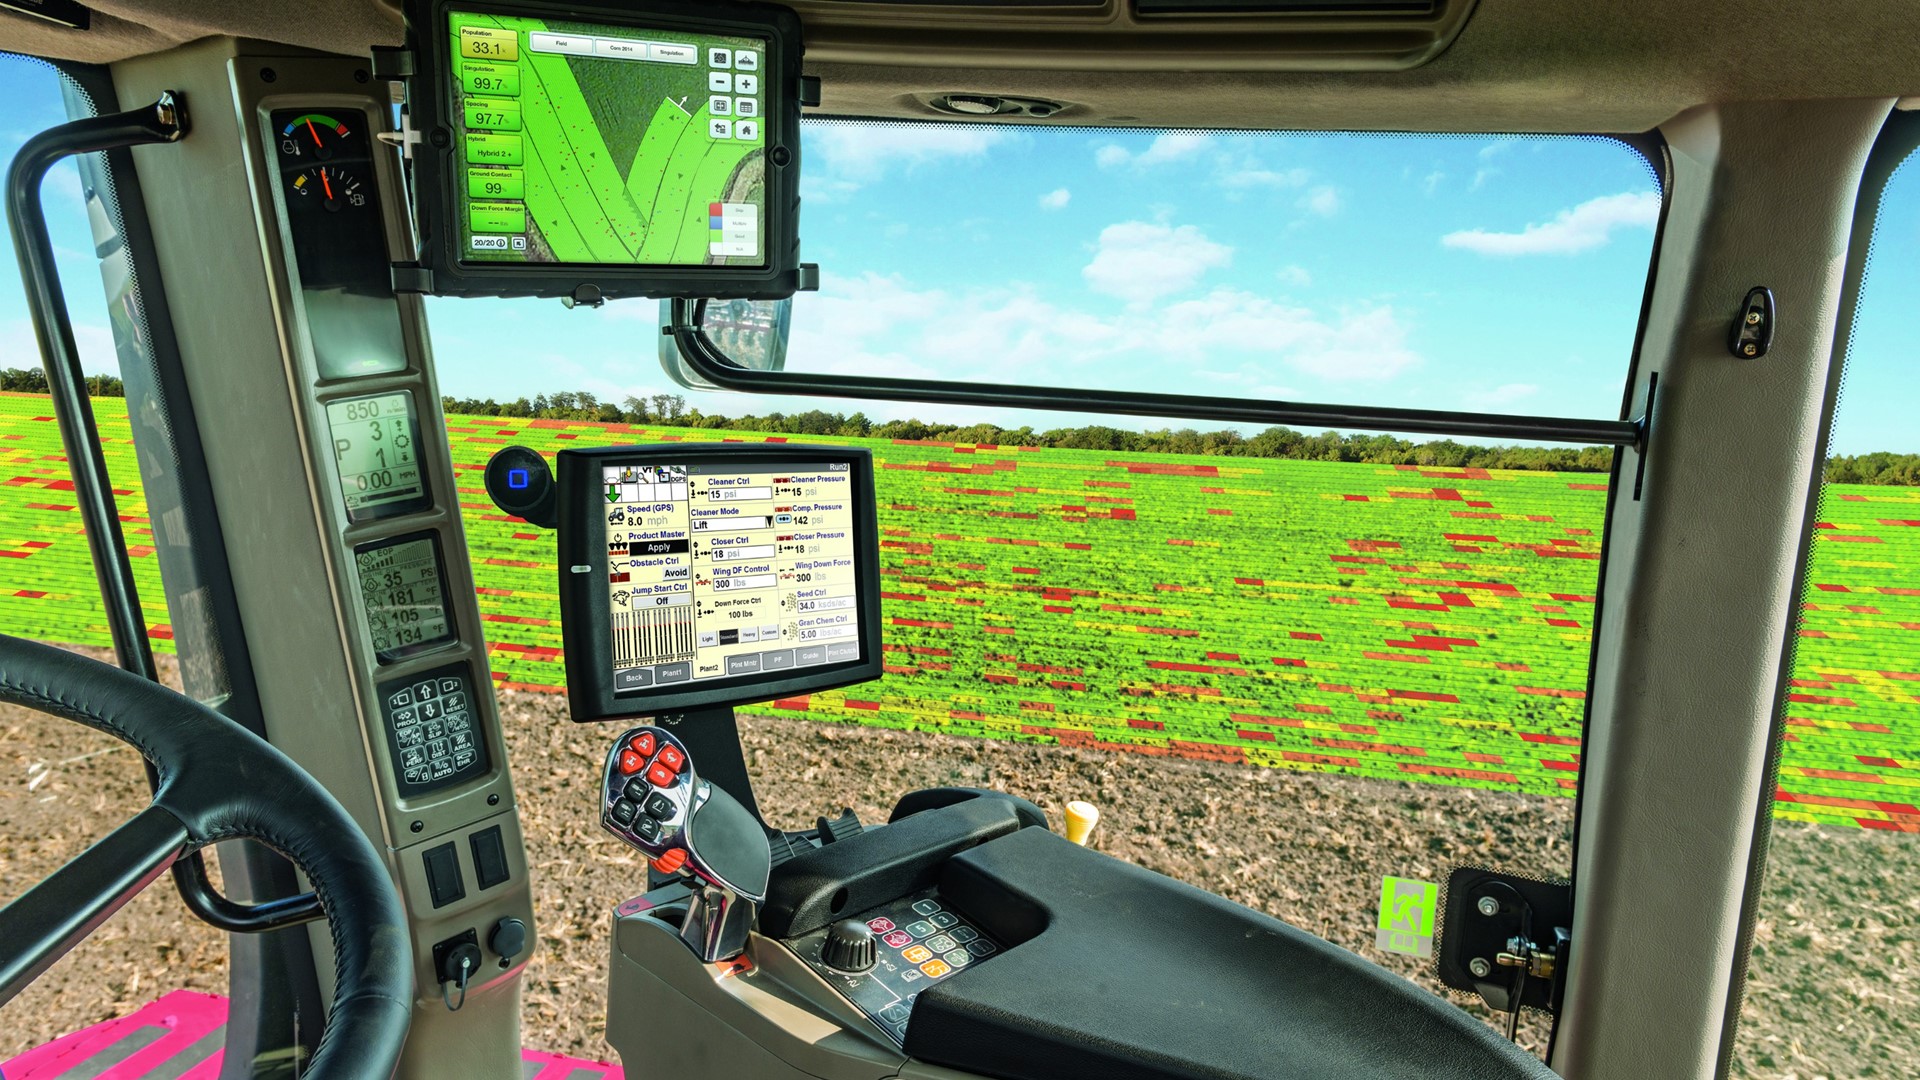 Case IH Early Riser planters can easily be equipped with The Climate Corporation FieldView high-definition mapping